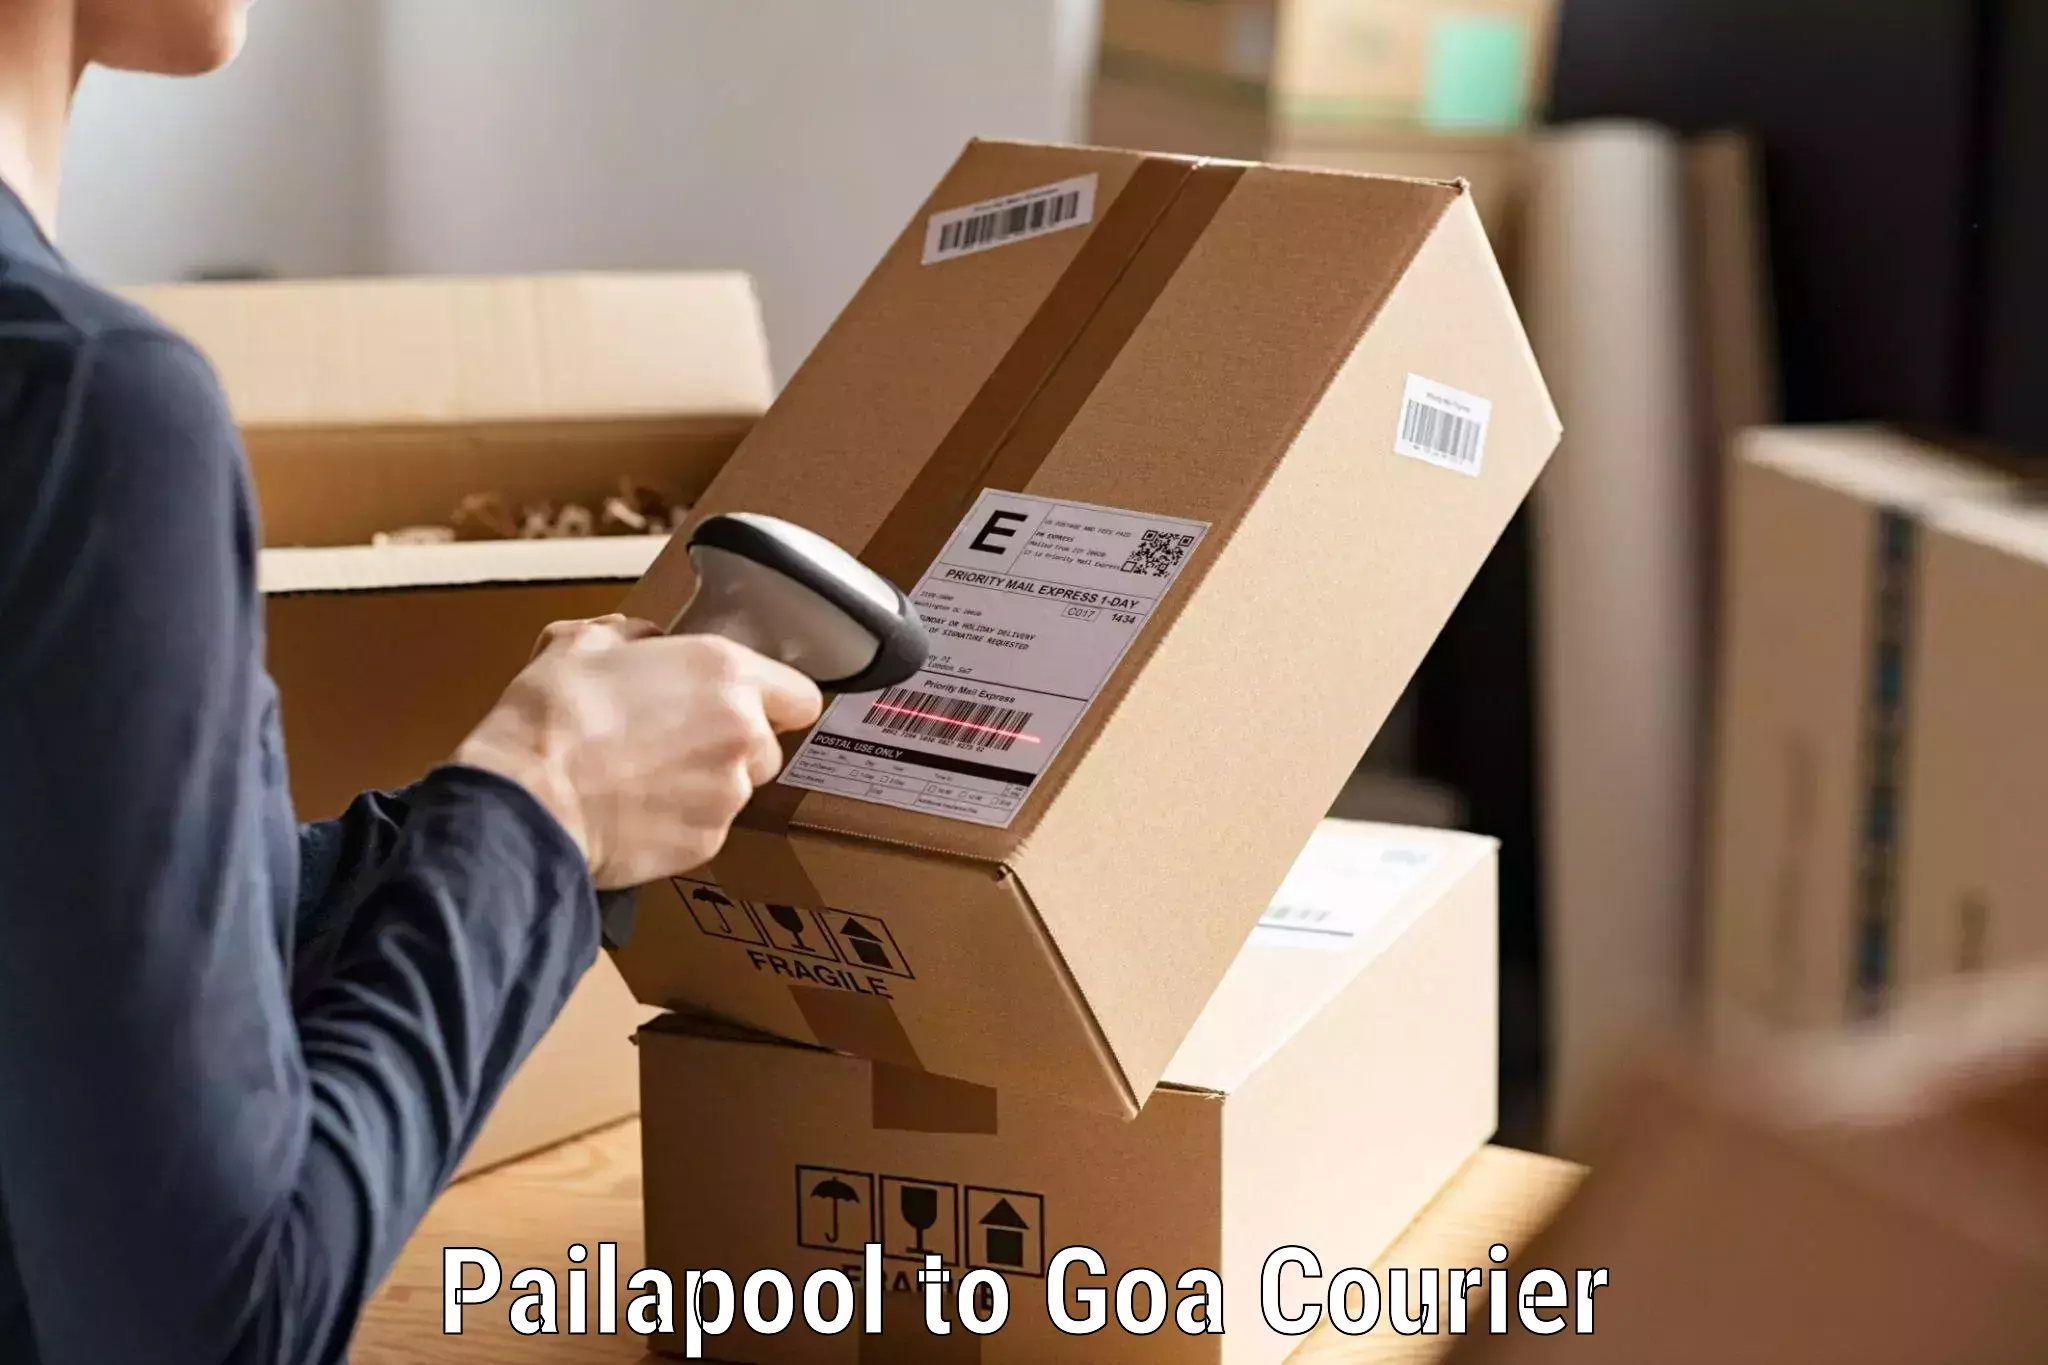 Efficient package consolidation in Pailapool to Panaji